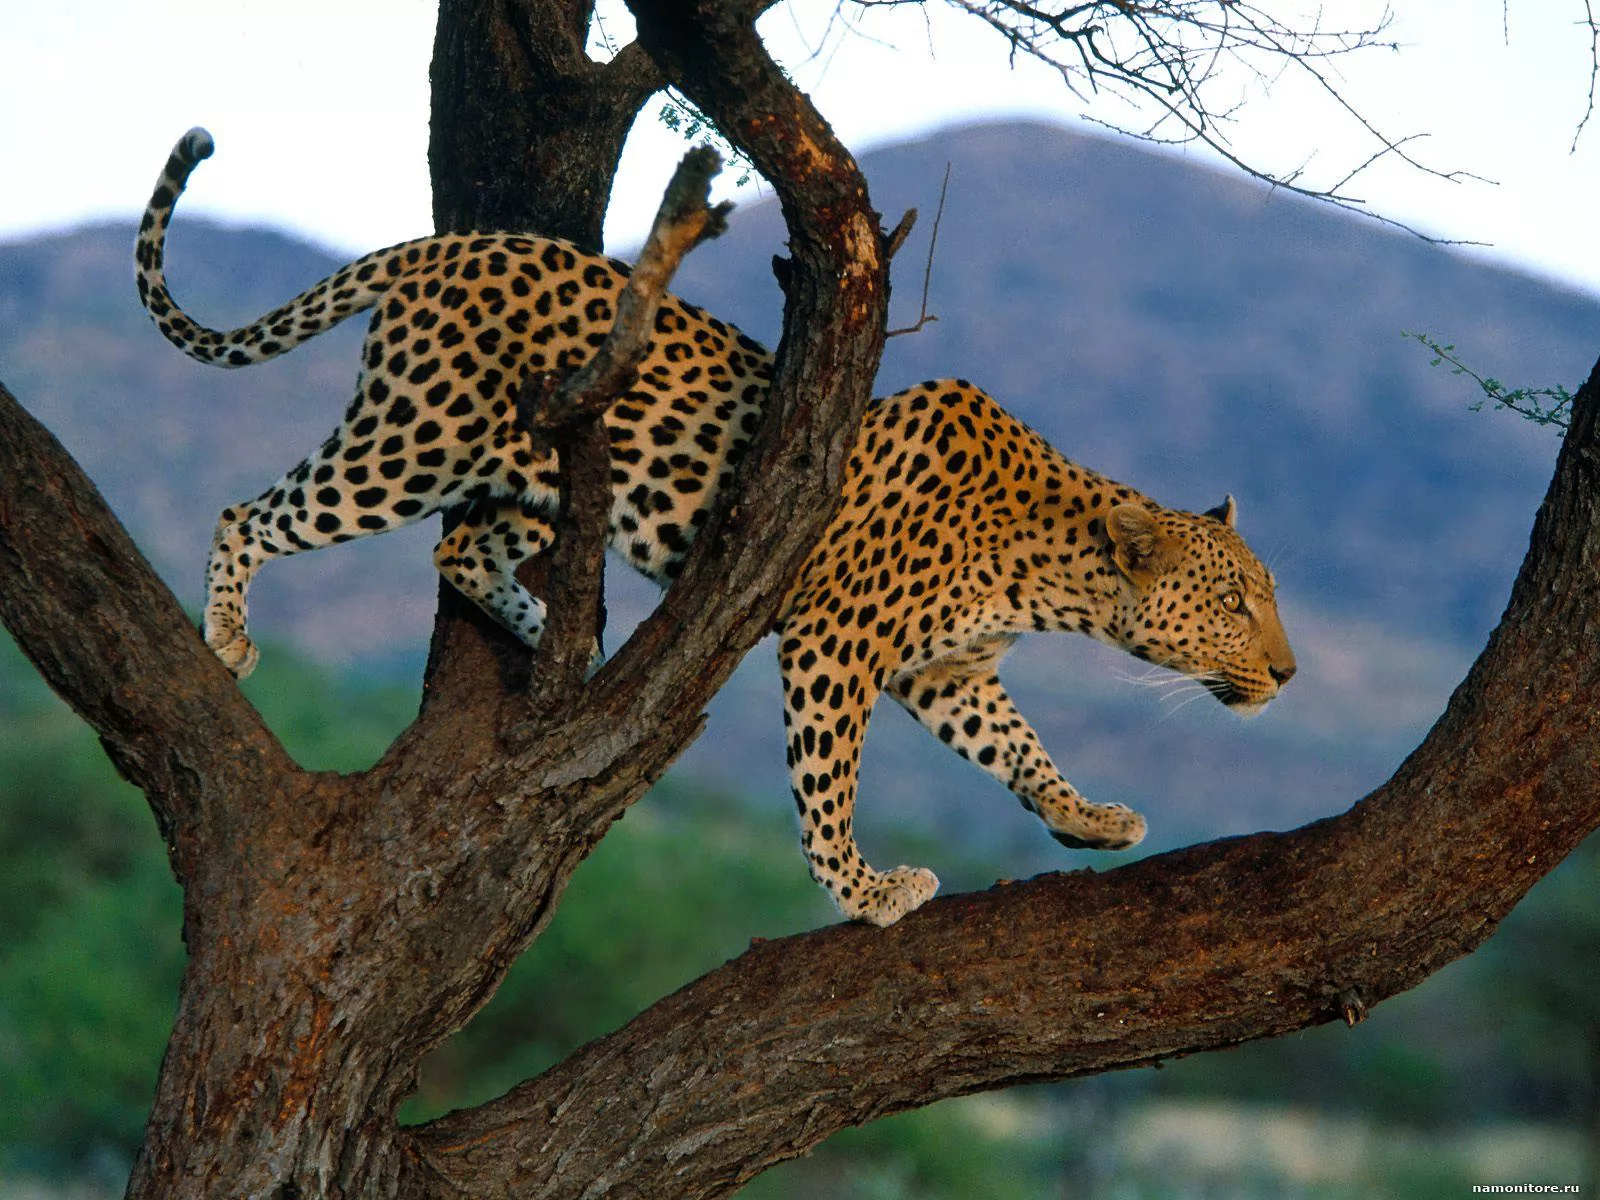 Leopard on a tree, animals, cats, leopards x